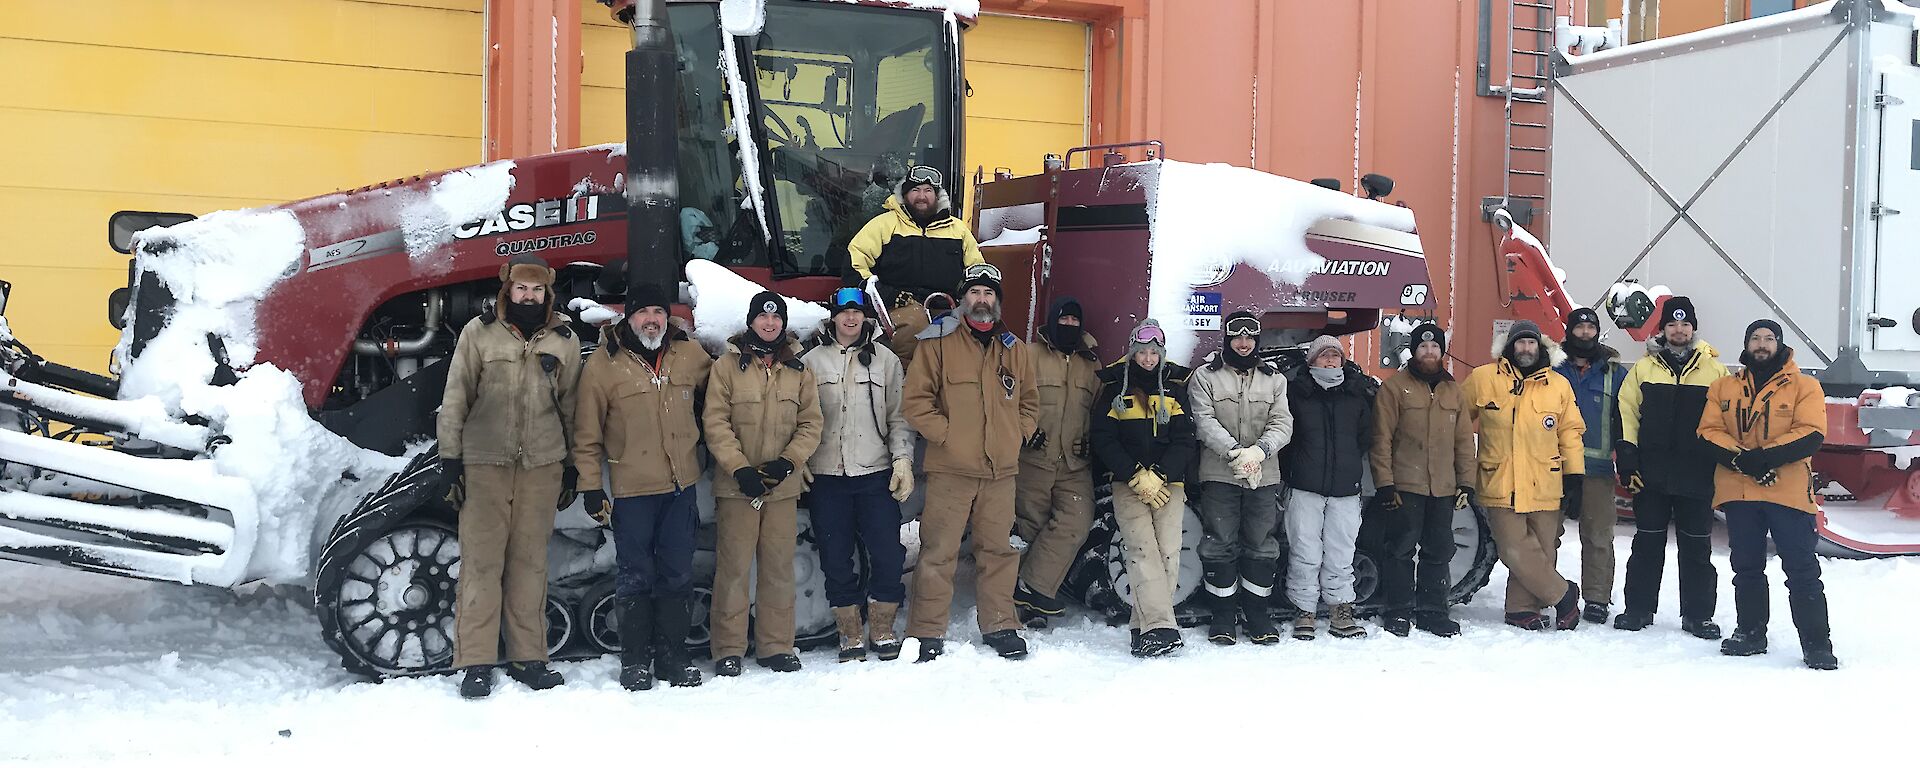 The 16 members of the traverse team standing in front of the red tracktor in front of the orange workshop